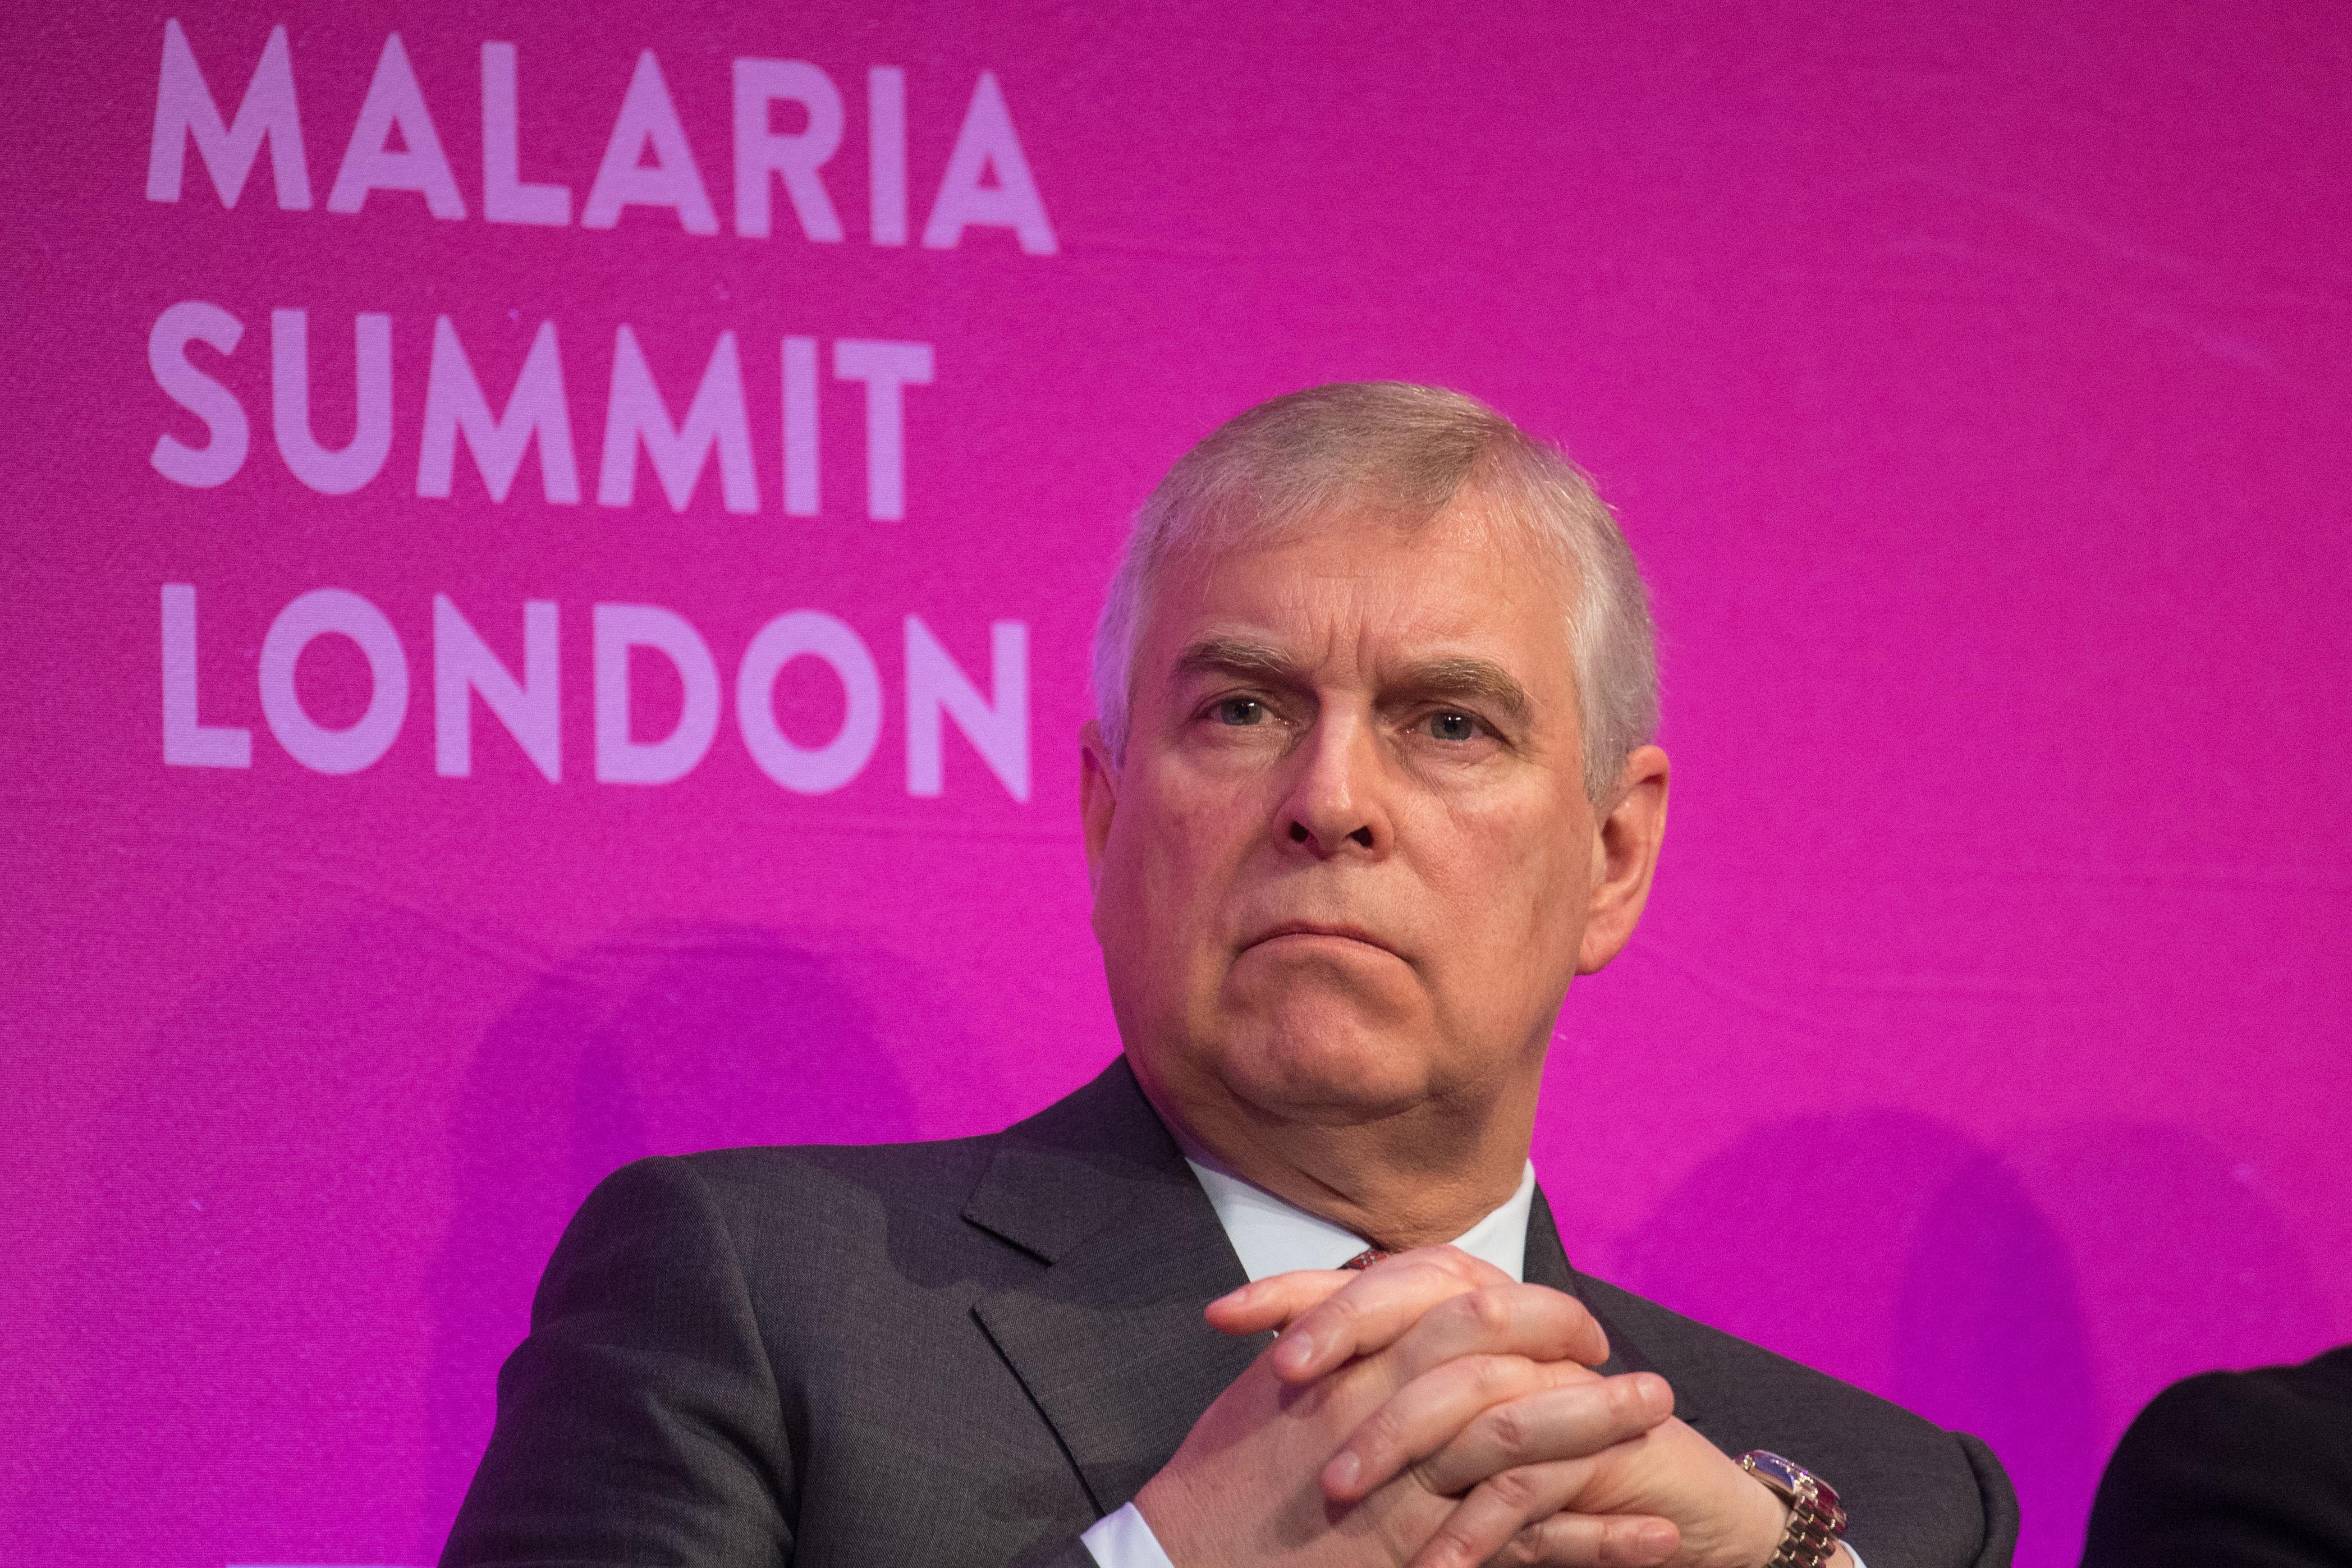 Prince Andrew in front of a backdrop that says Malaria Summit London.